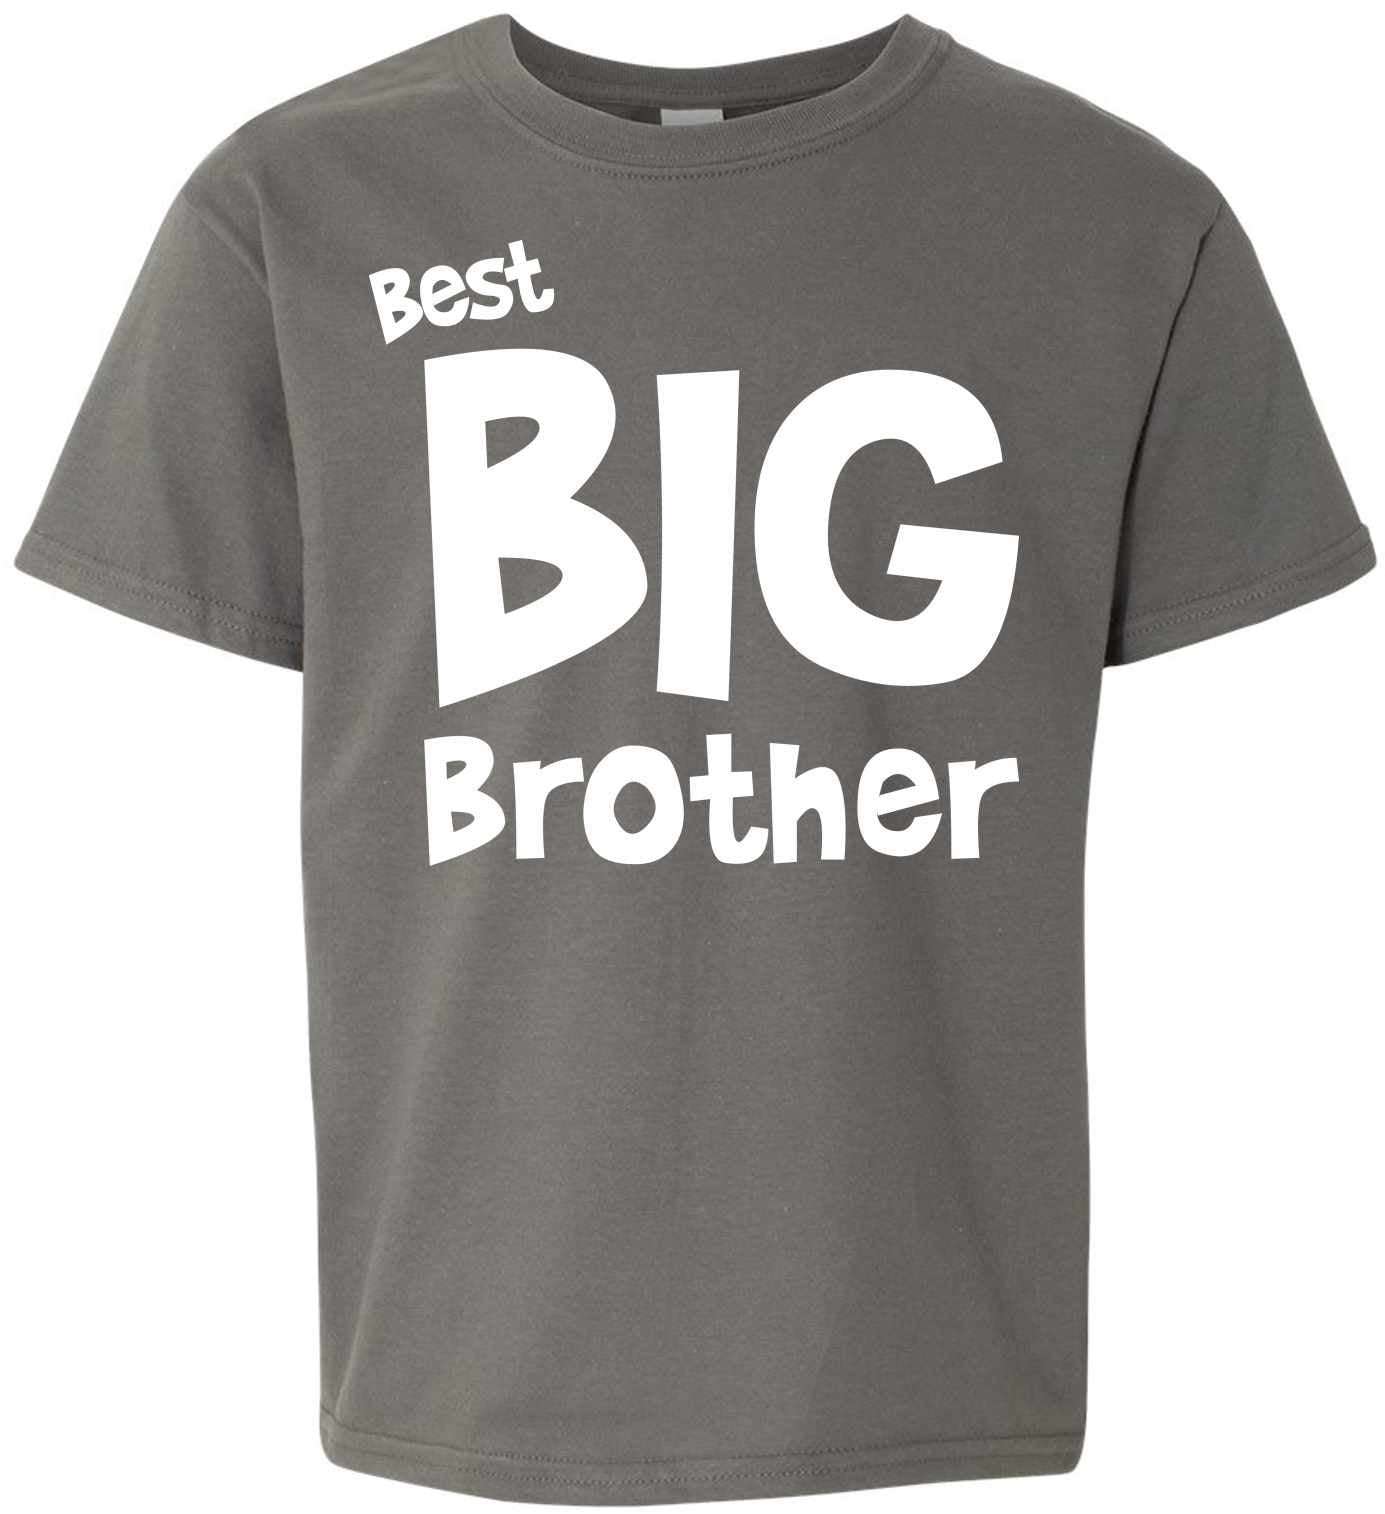 Best Big Brother on Youth T-Shirt (#1138-201)